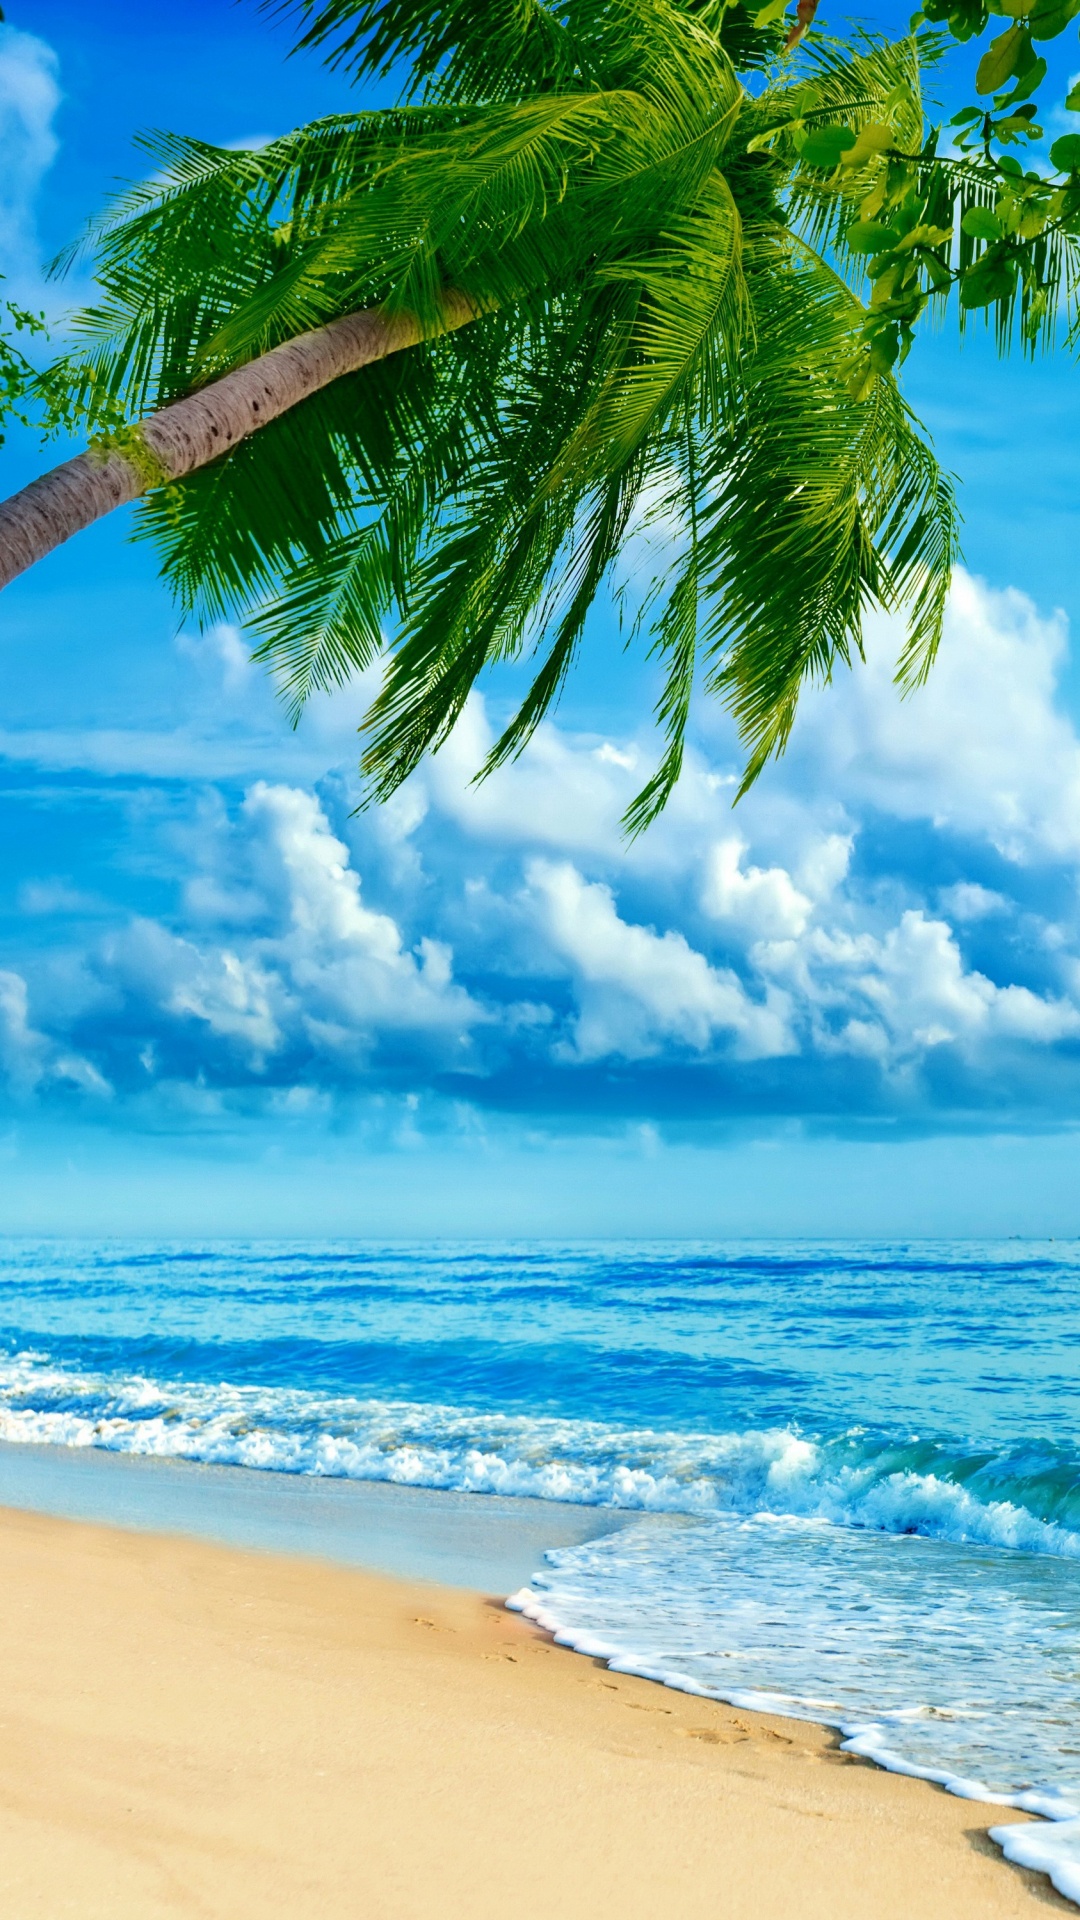 Palm Tree on Beach Shore During Daytime. Wallpaper in 1080x1920 Resolution